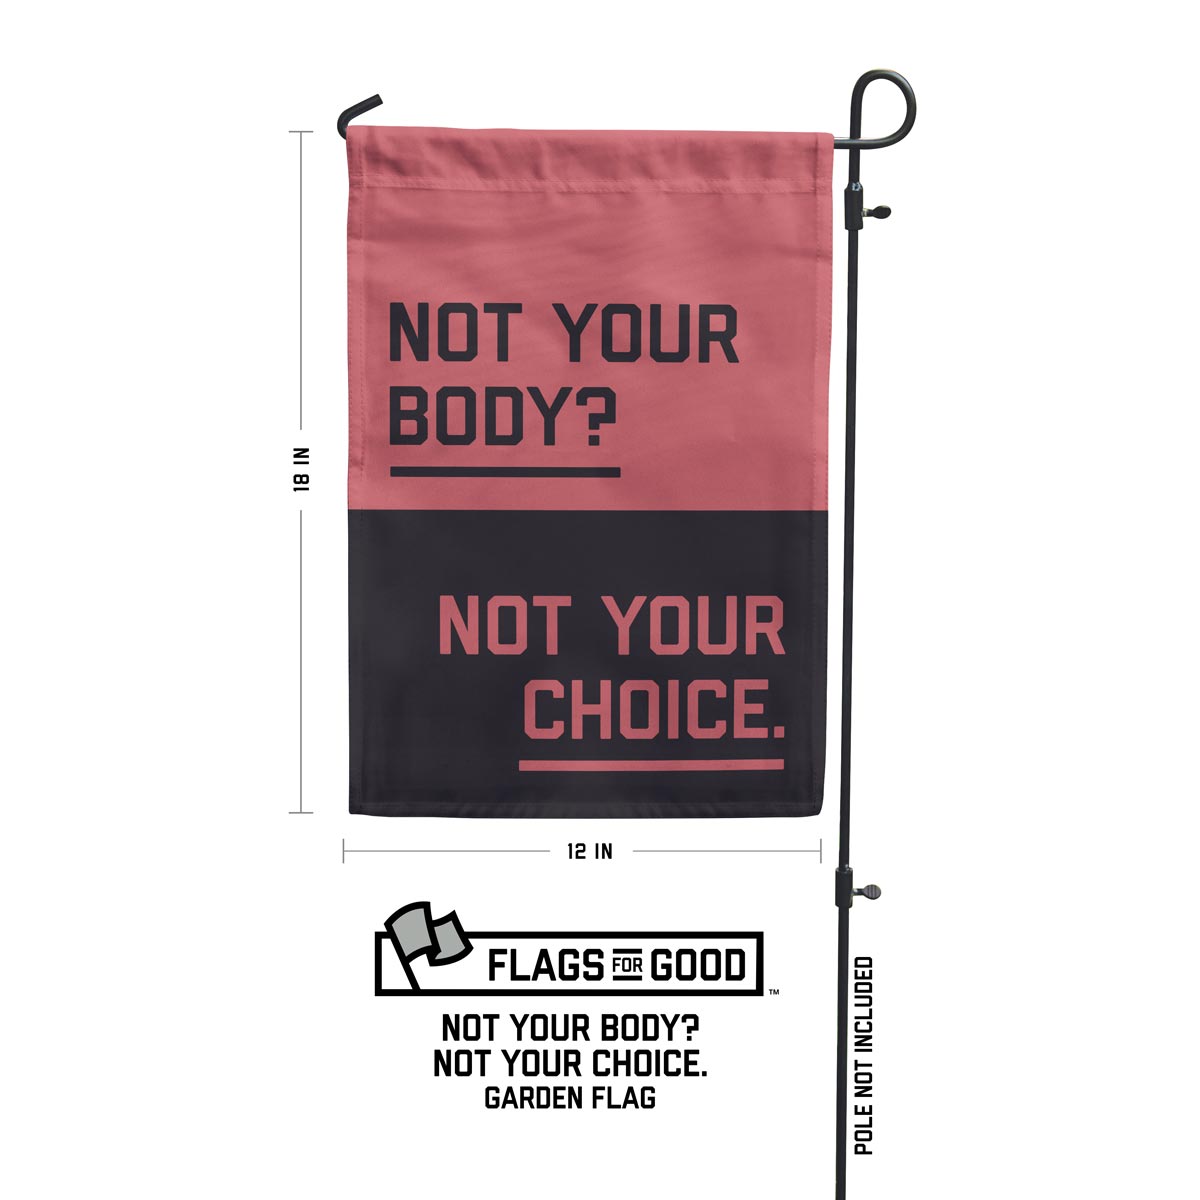 "Not your body? Not your choice." garden flag measurements of 12 by 18 inches. Flag pole not included